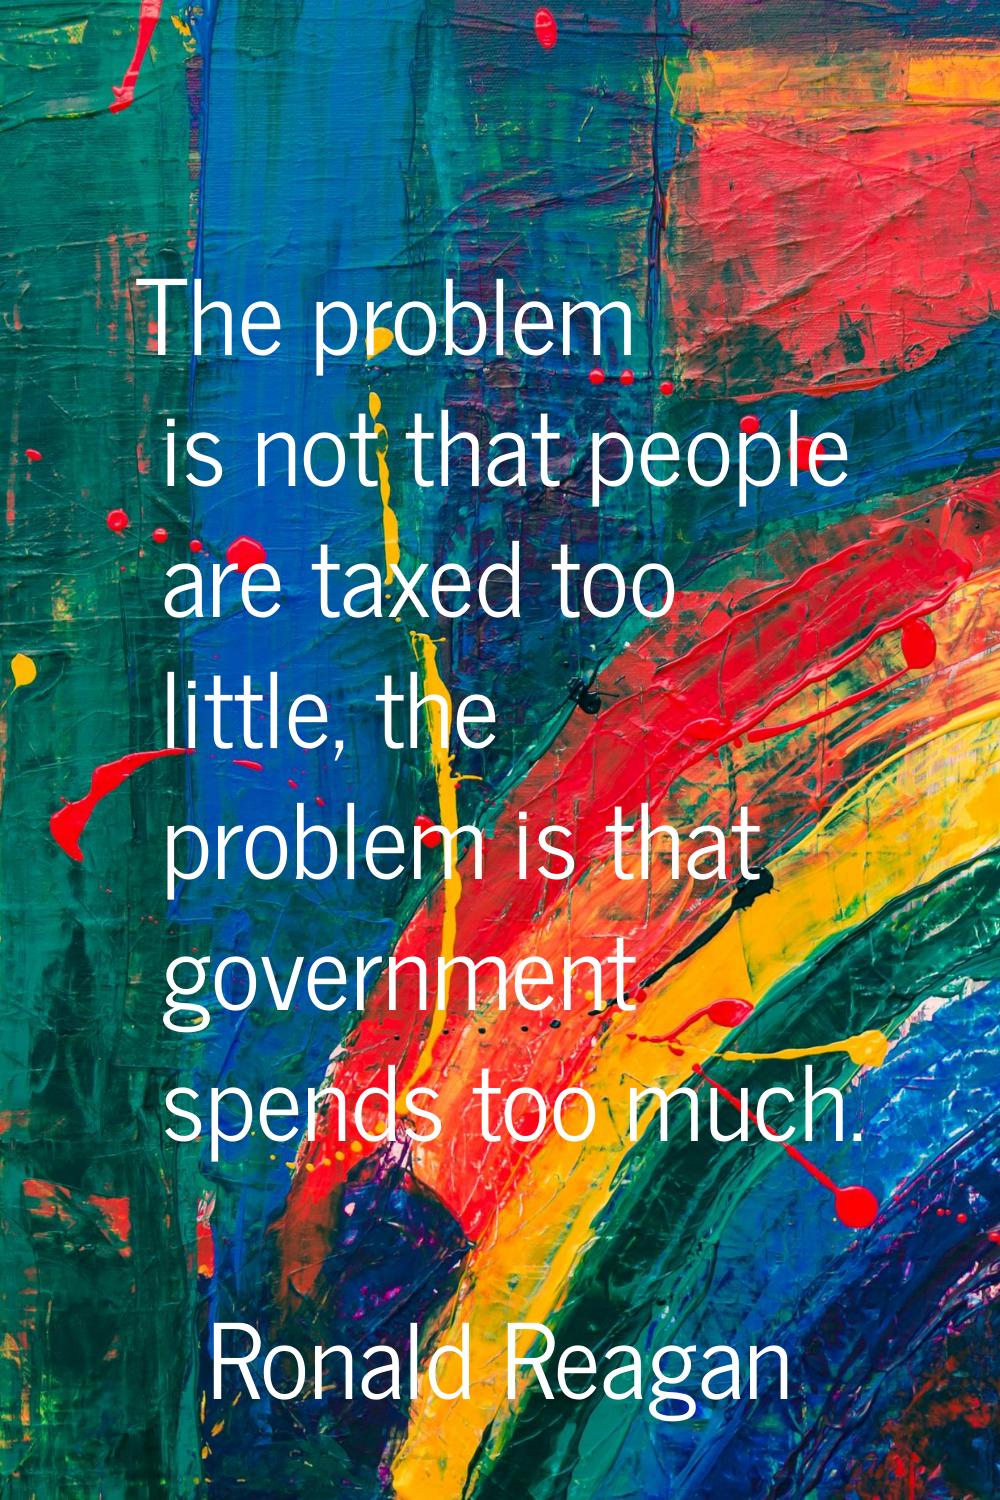 The problem is not that people are taxed too little, the problem is that government spends too much